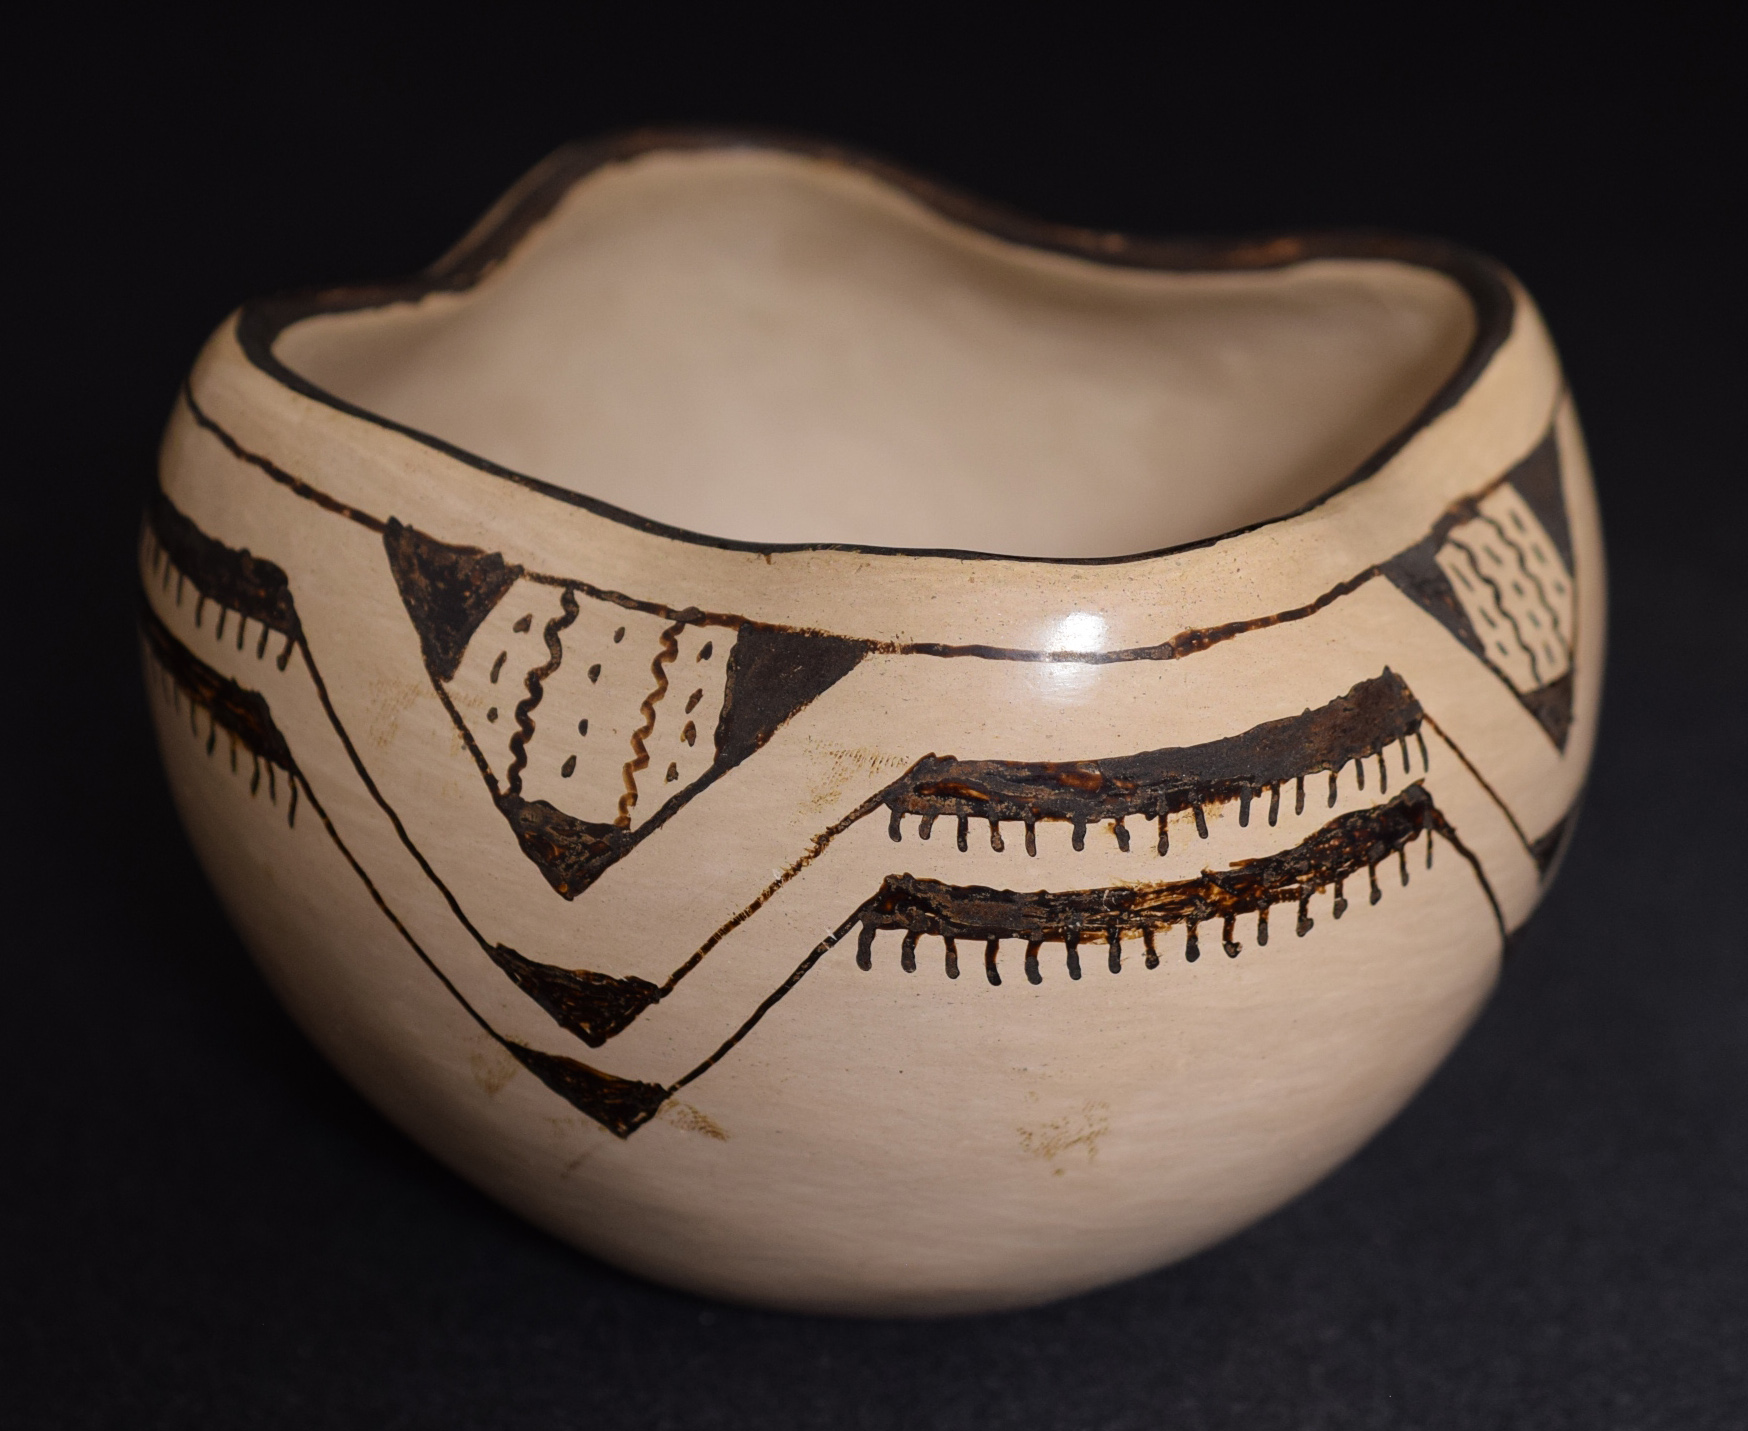 Pee-Posh pottery collection, bowl with geometric design